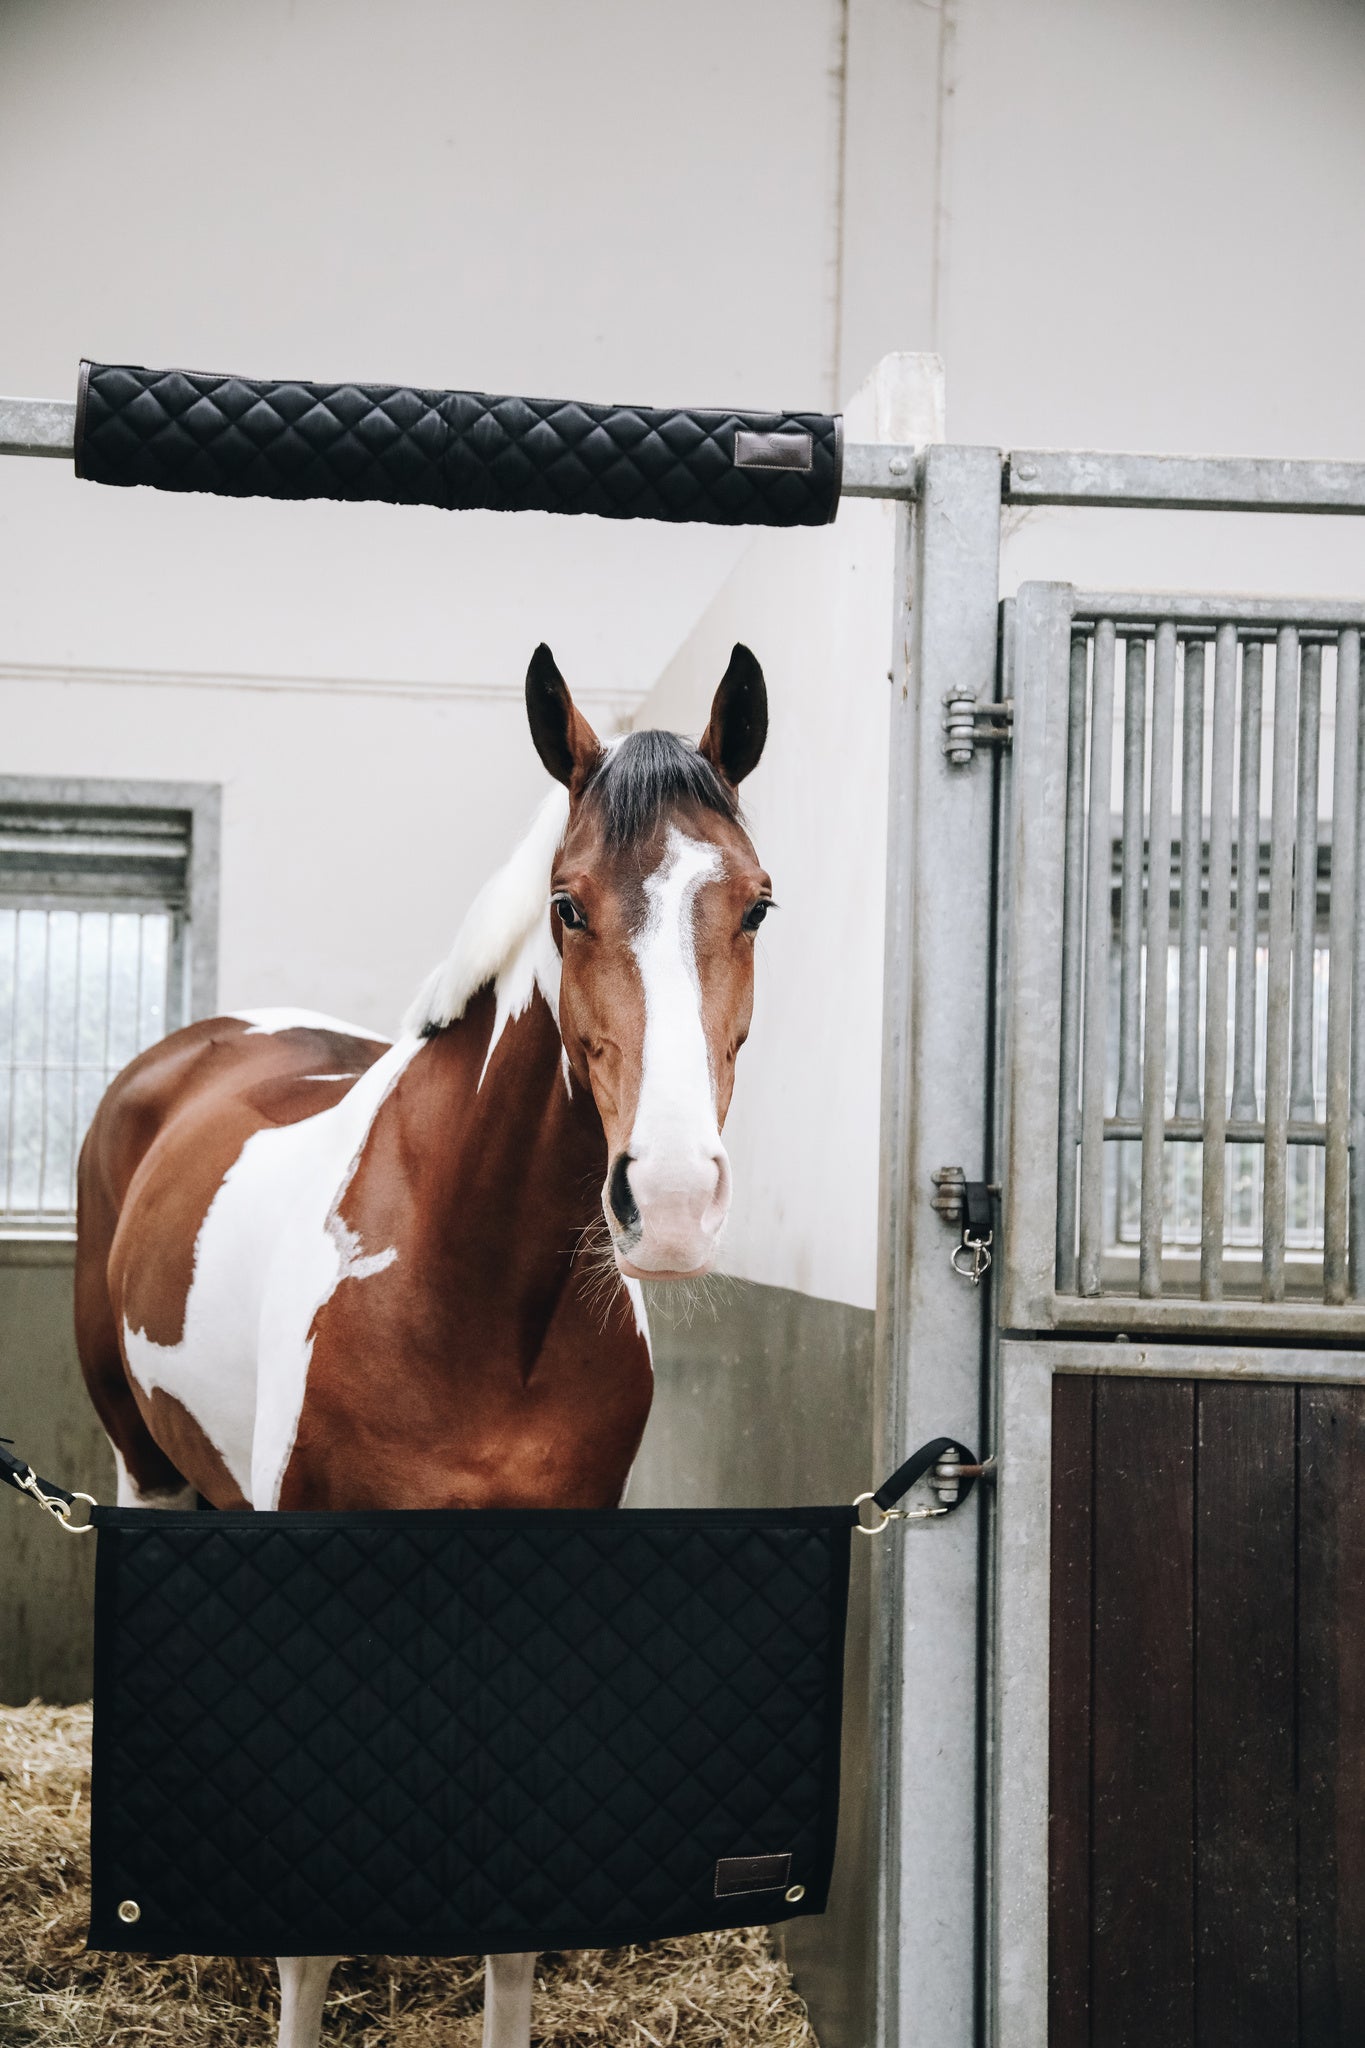 The Kentucky Horsewear Stable Head Protector is the perfect choice to protect your horses head when in the stable. It is super quick and easy to attach with strong Velcro fastenings.